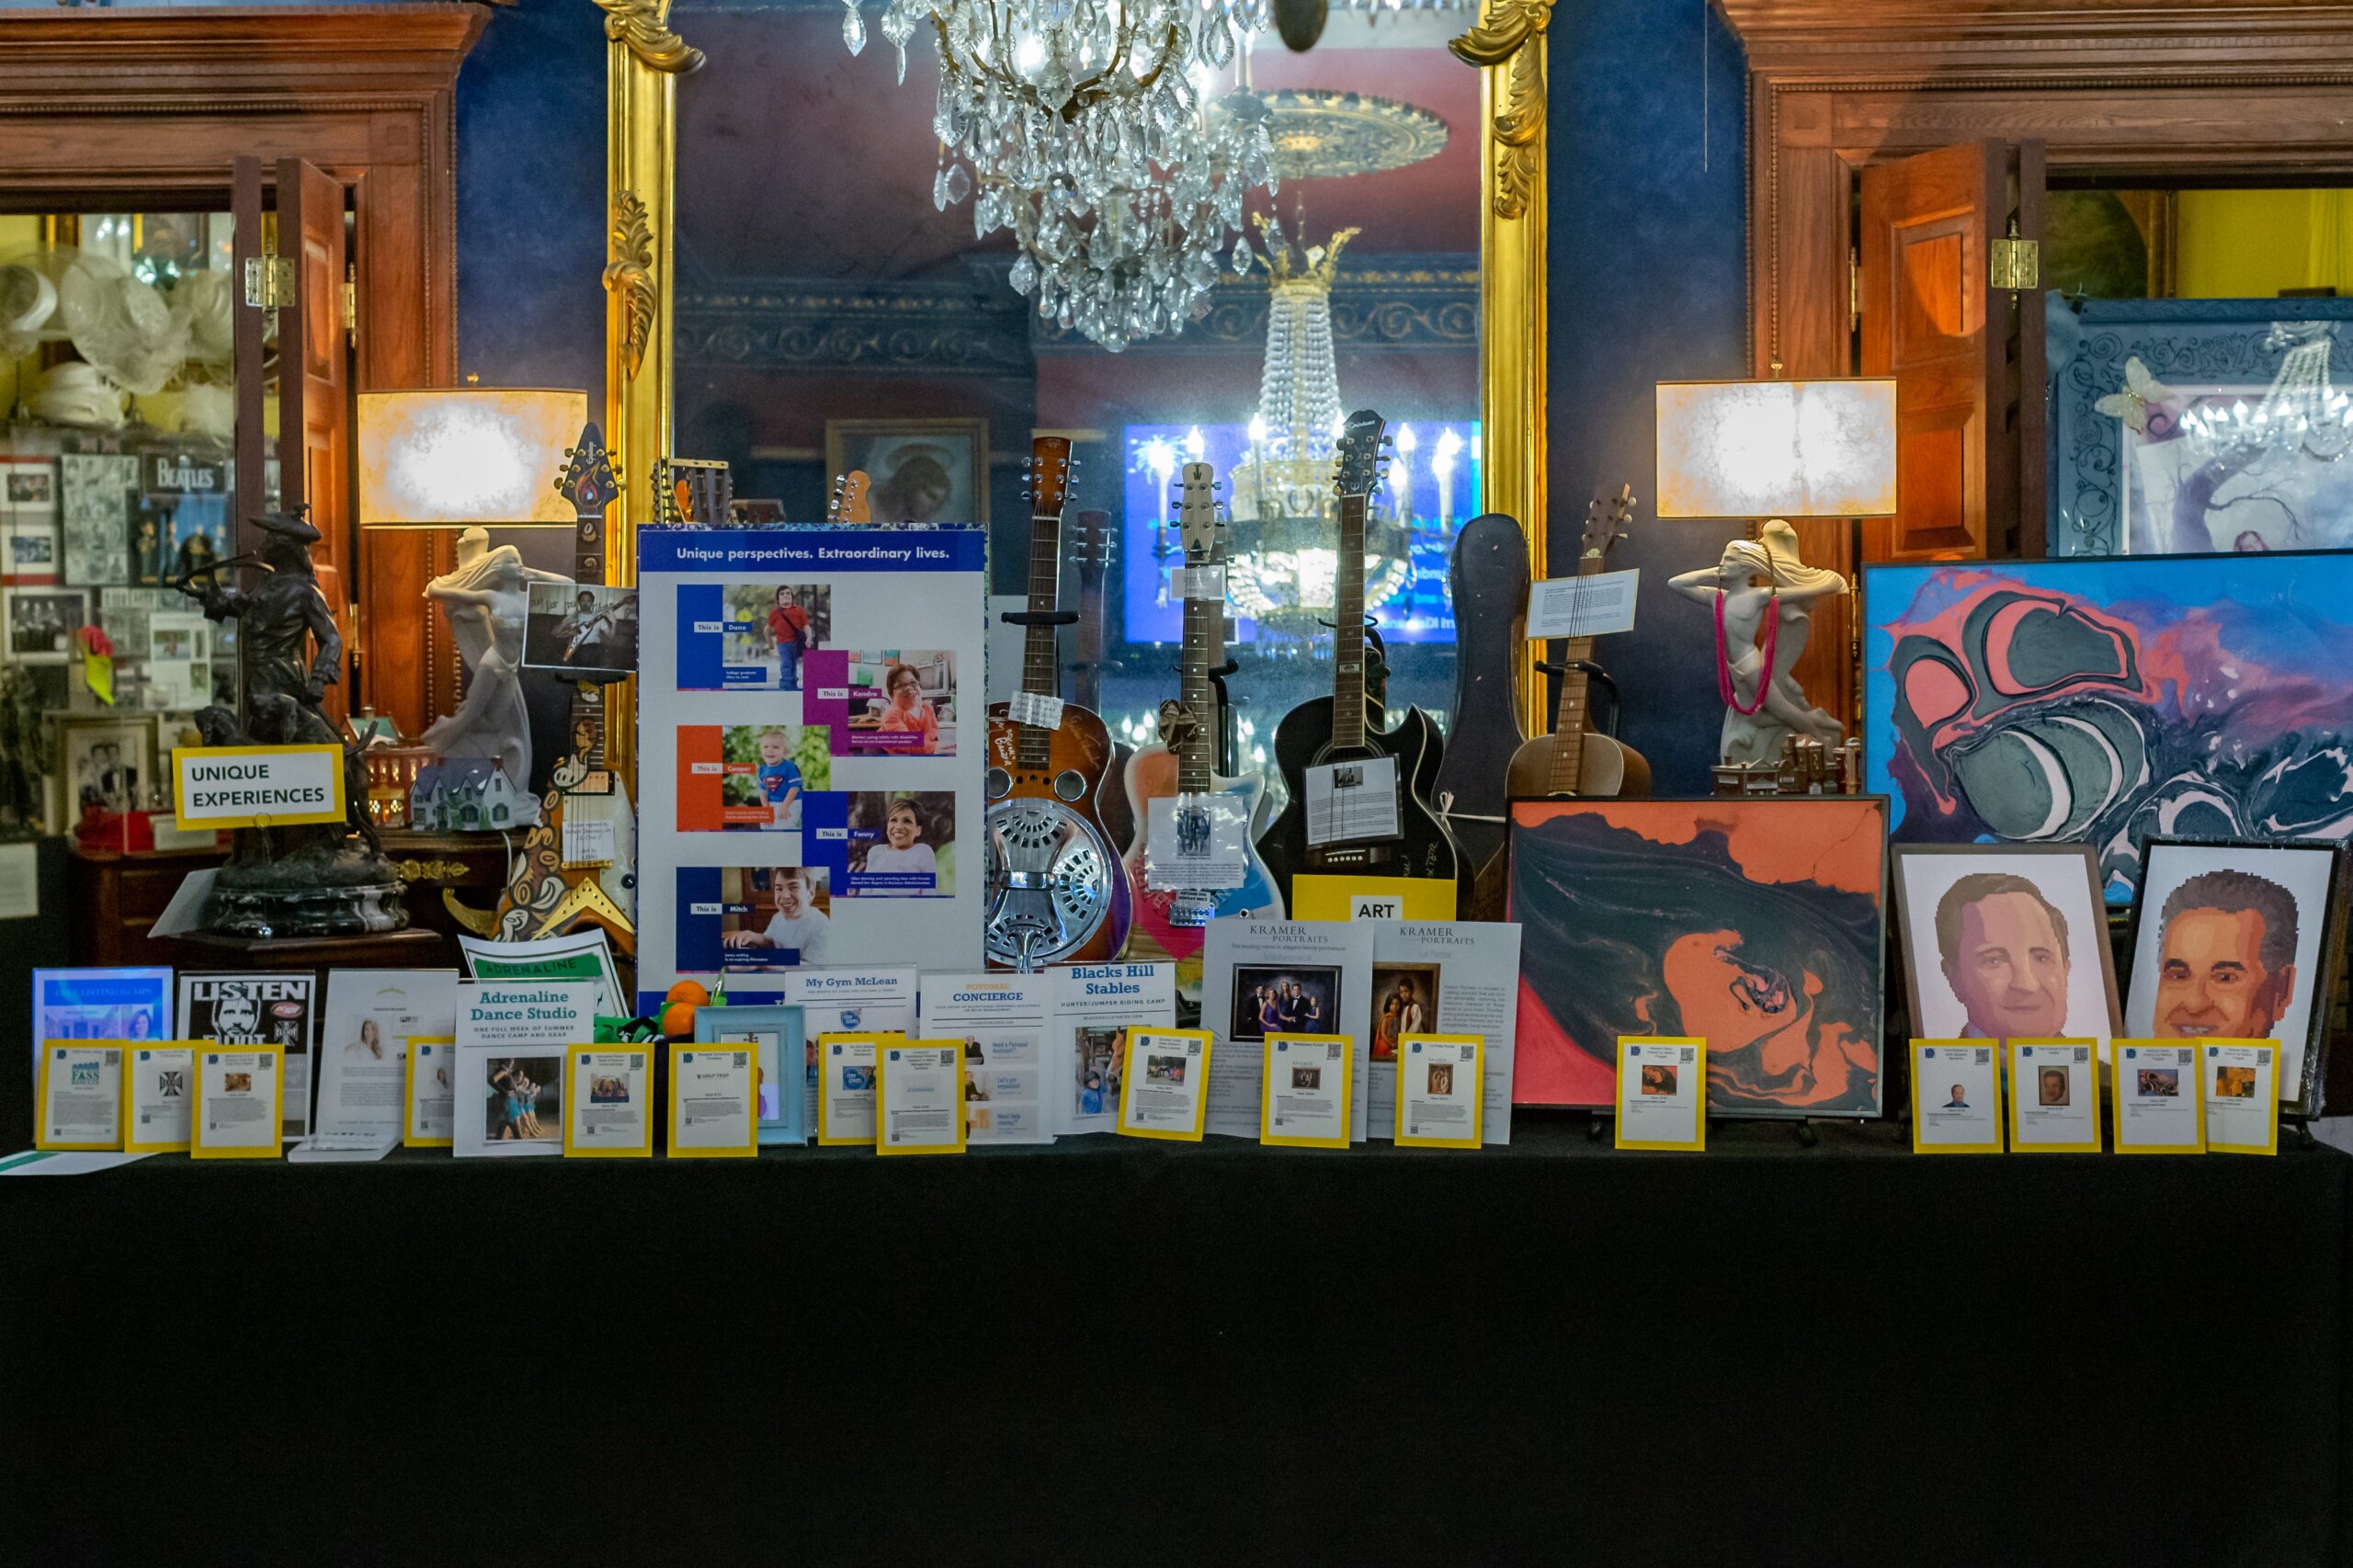 A table displaying awards for MPS fundraising efforts